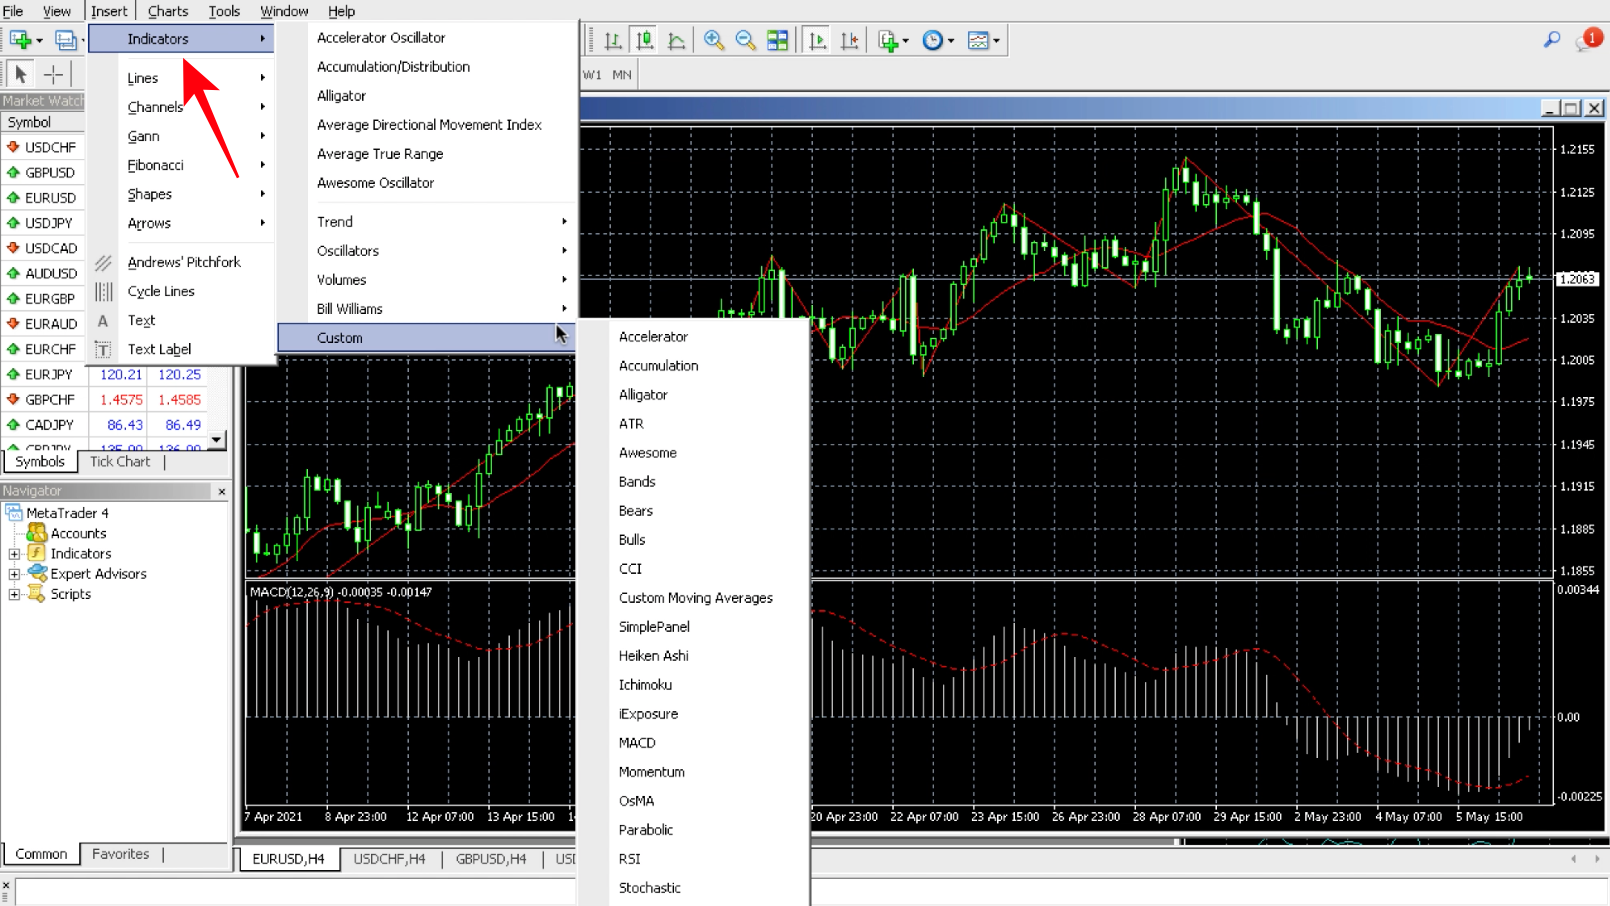 How to conduct a technical analysis and open trading indicators on the MetaTrader 4